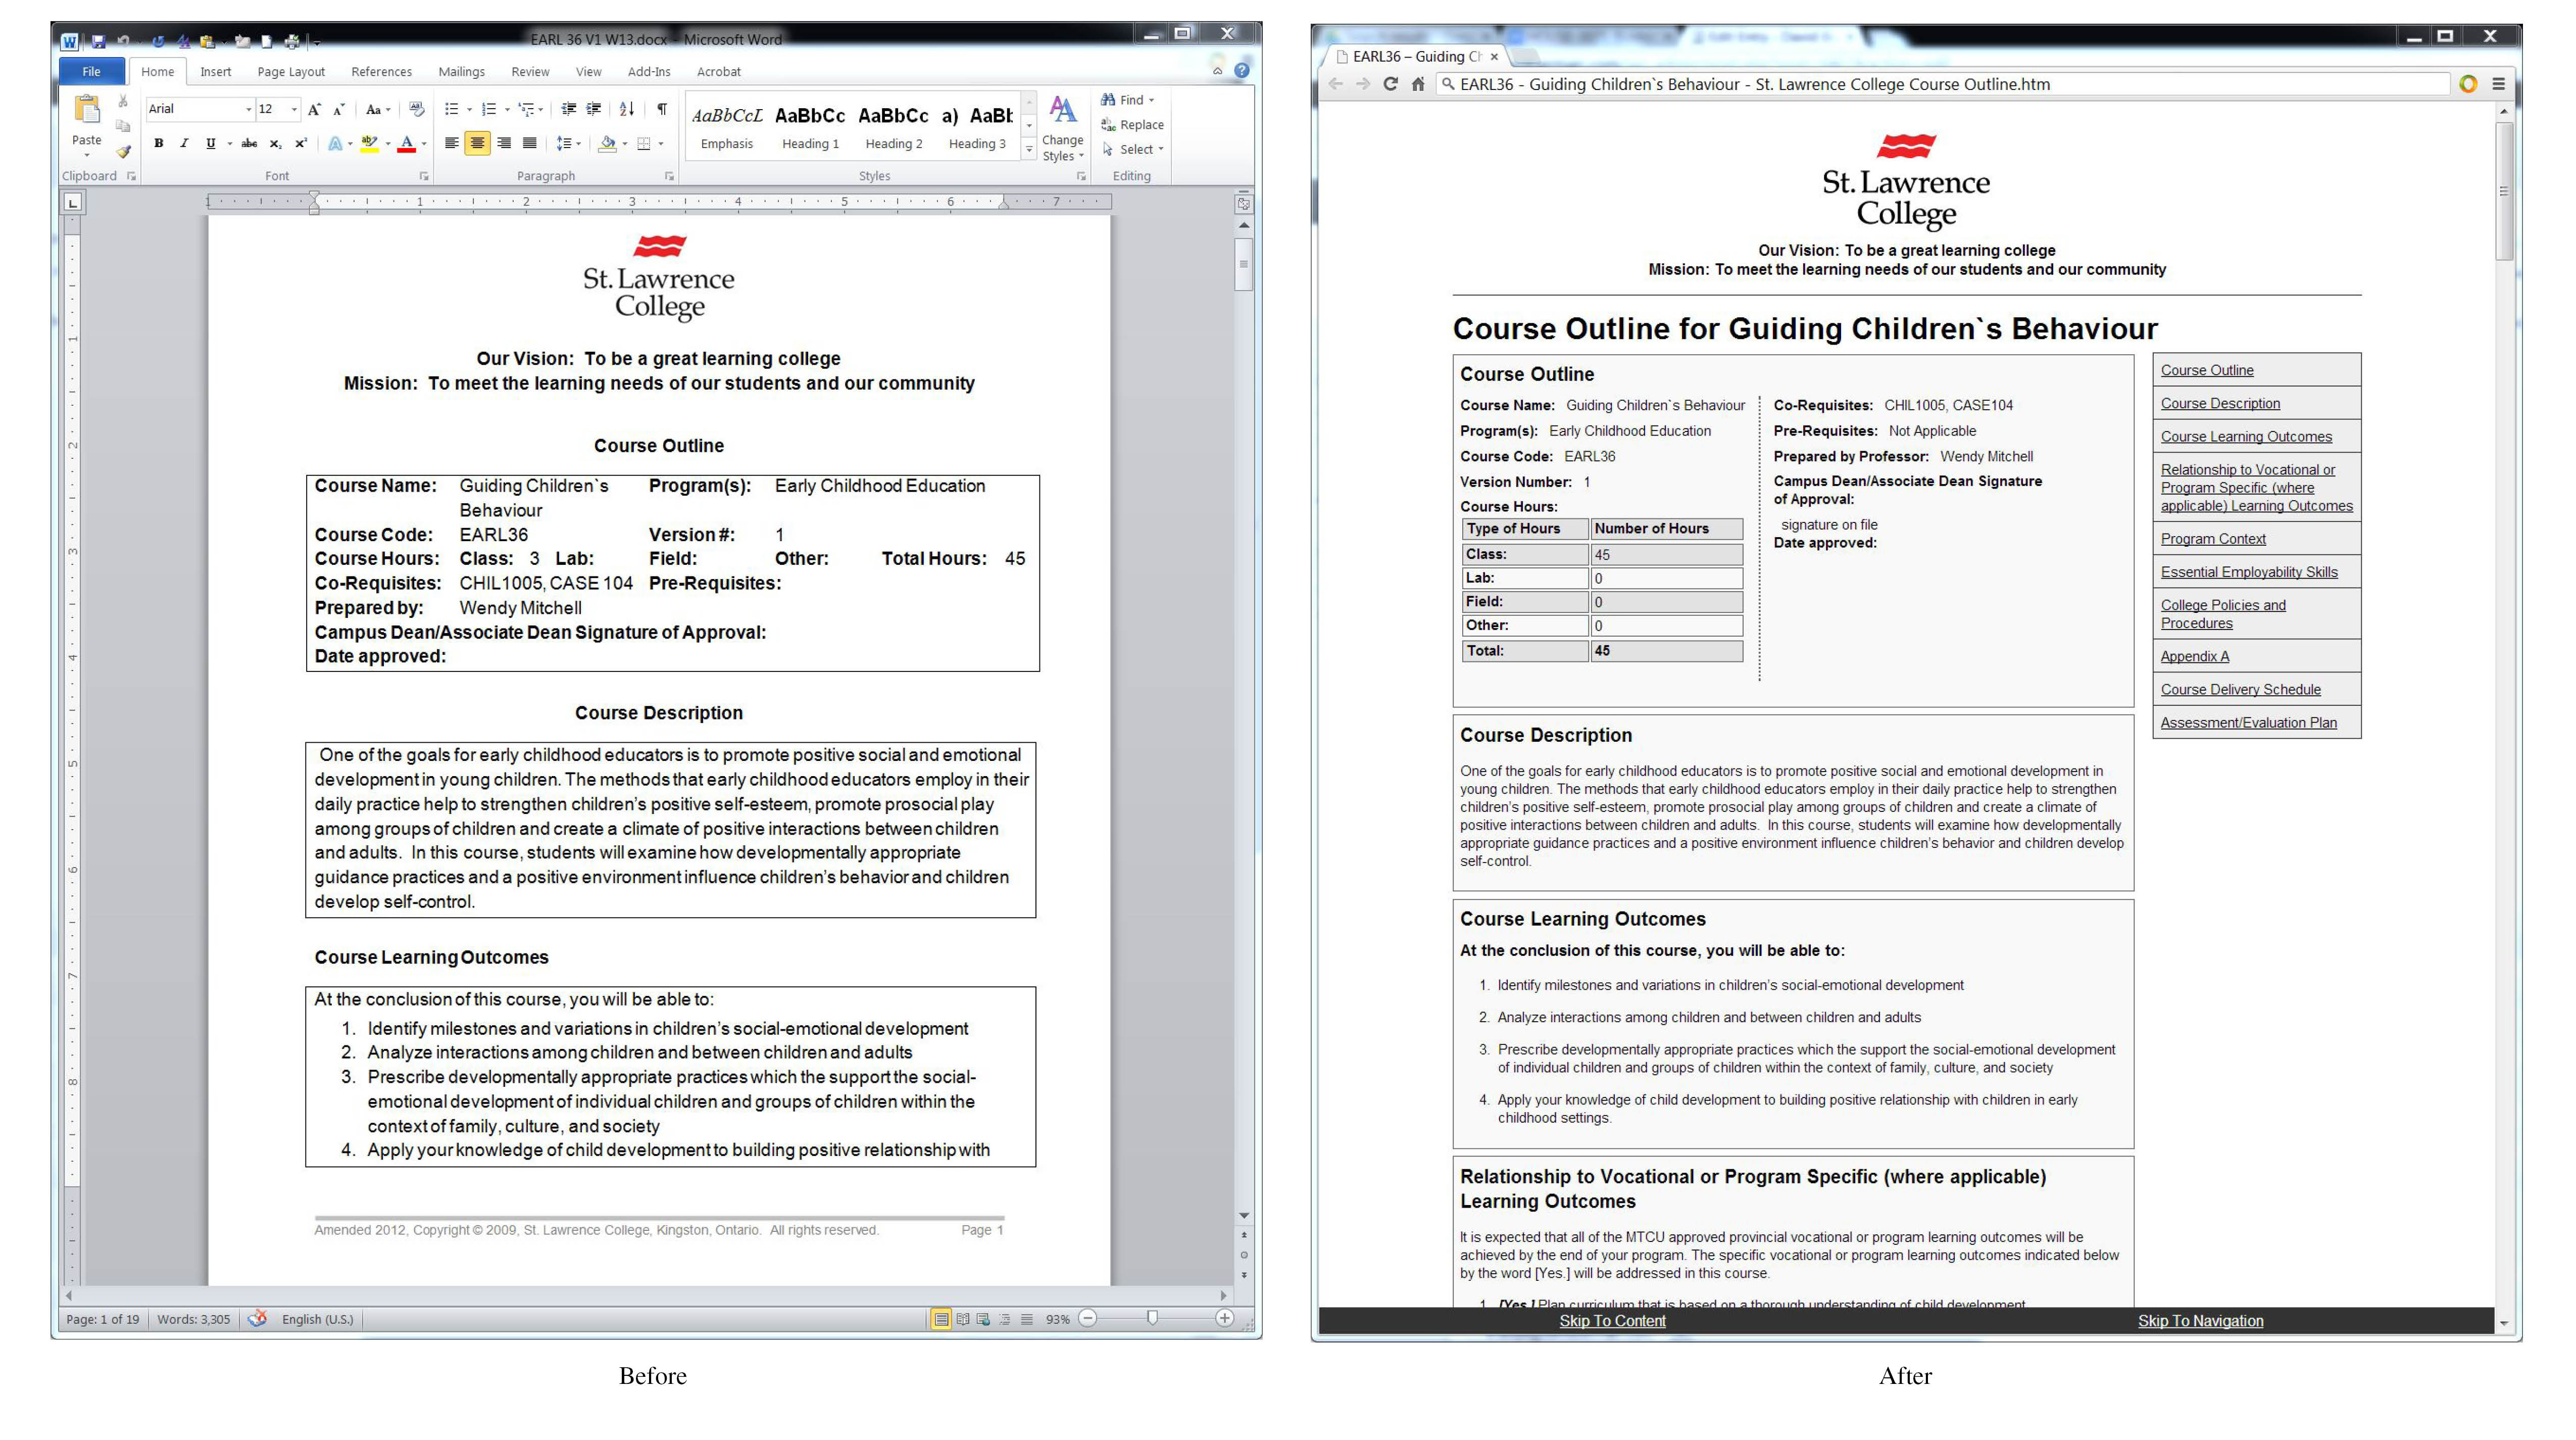 St. Lawrence college course outlines before as a word document and after shot in a browser